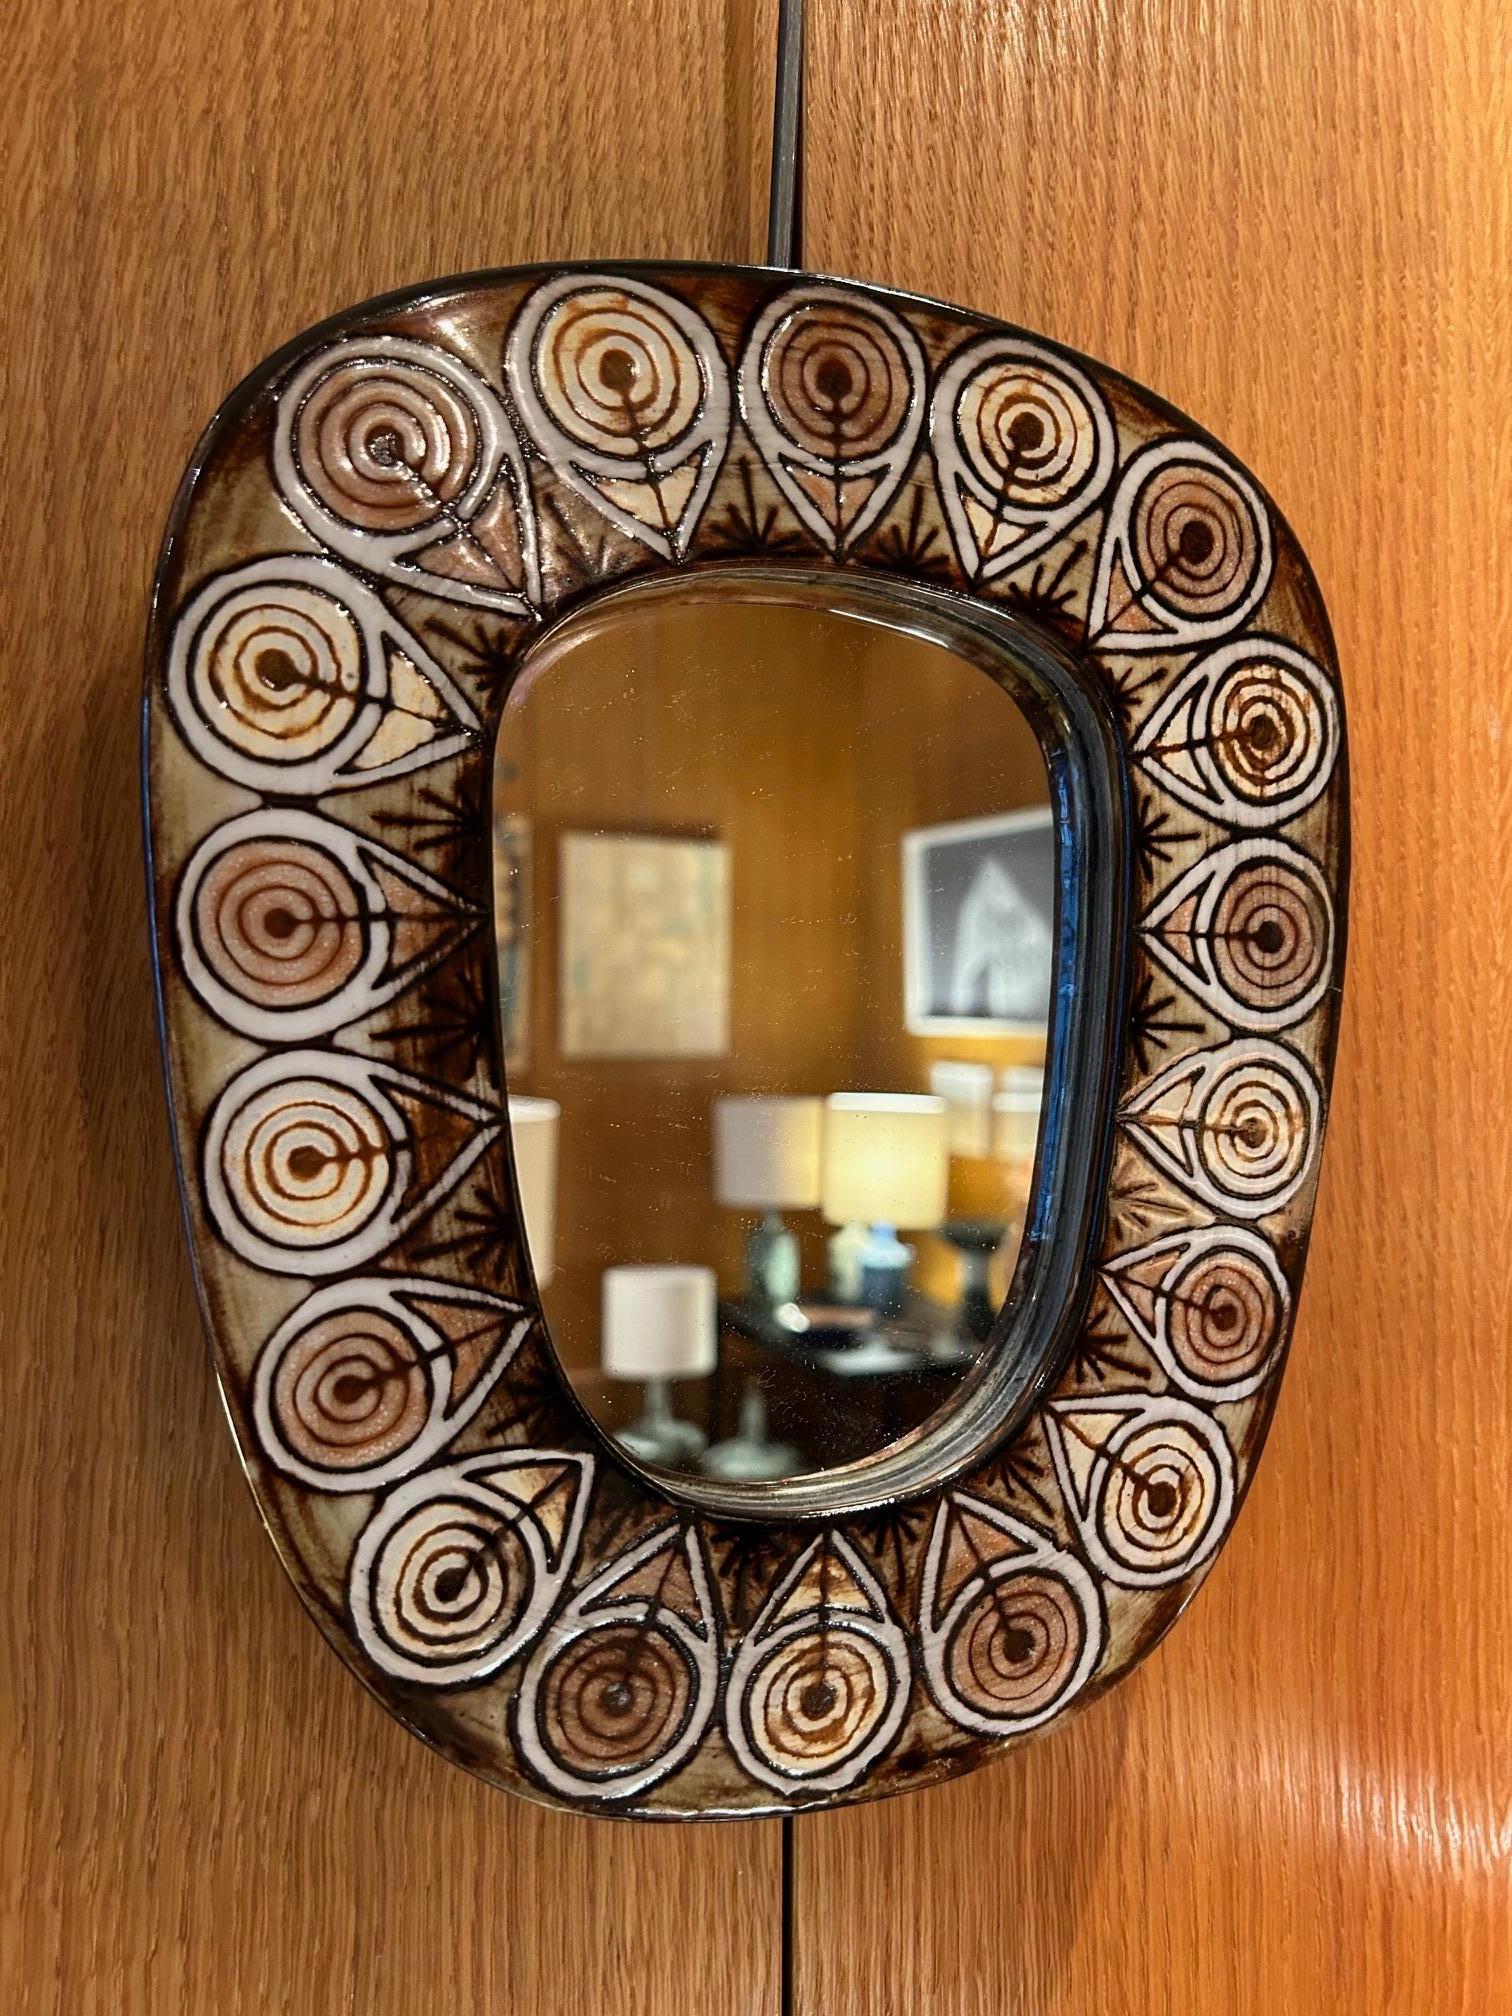 Ceramic mirror by Jean-Claude Malarmey, Vallauris, France, signed